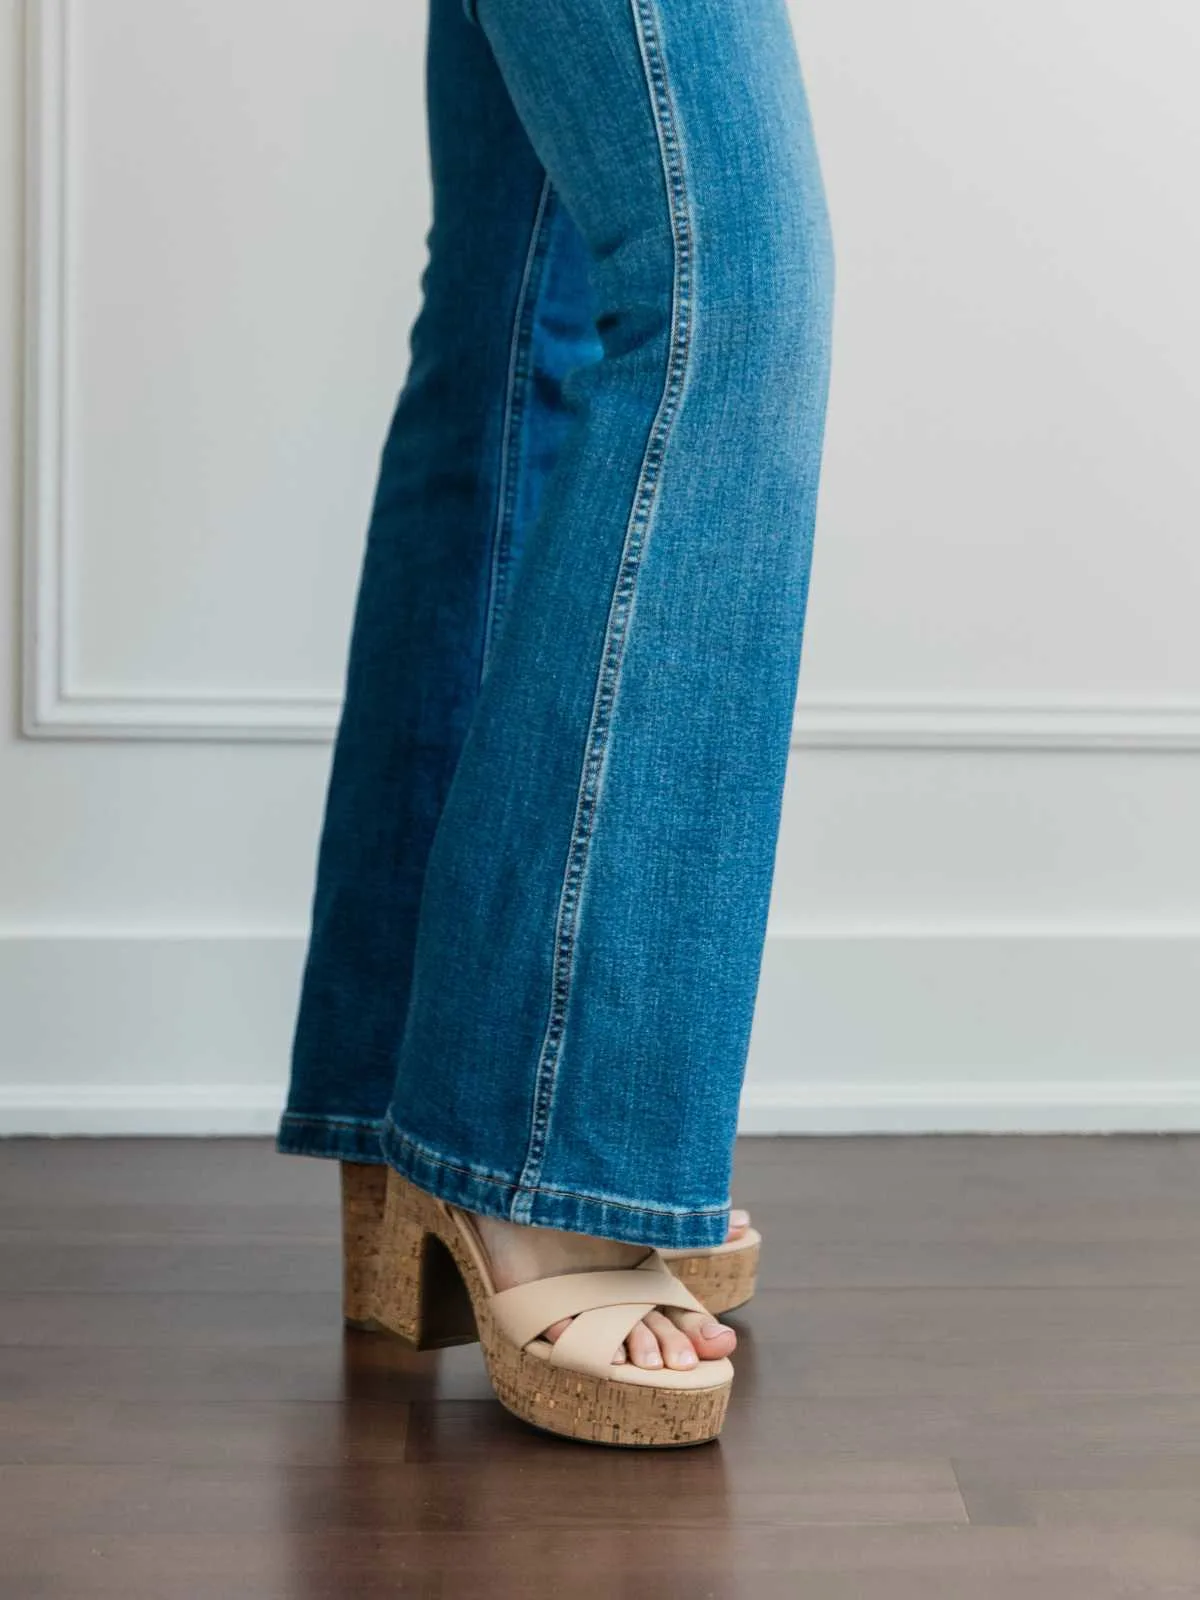 Cropped view of woman's legs wearing platform sandals with full length blue flare jeans.